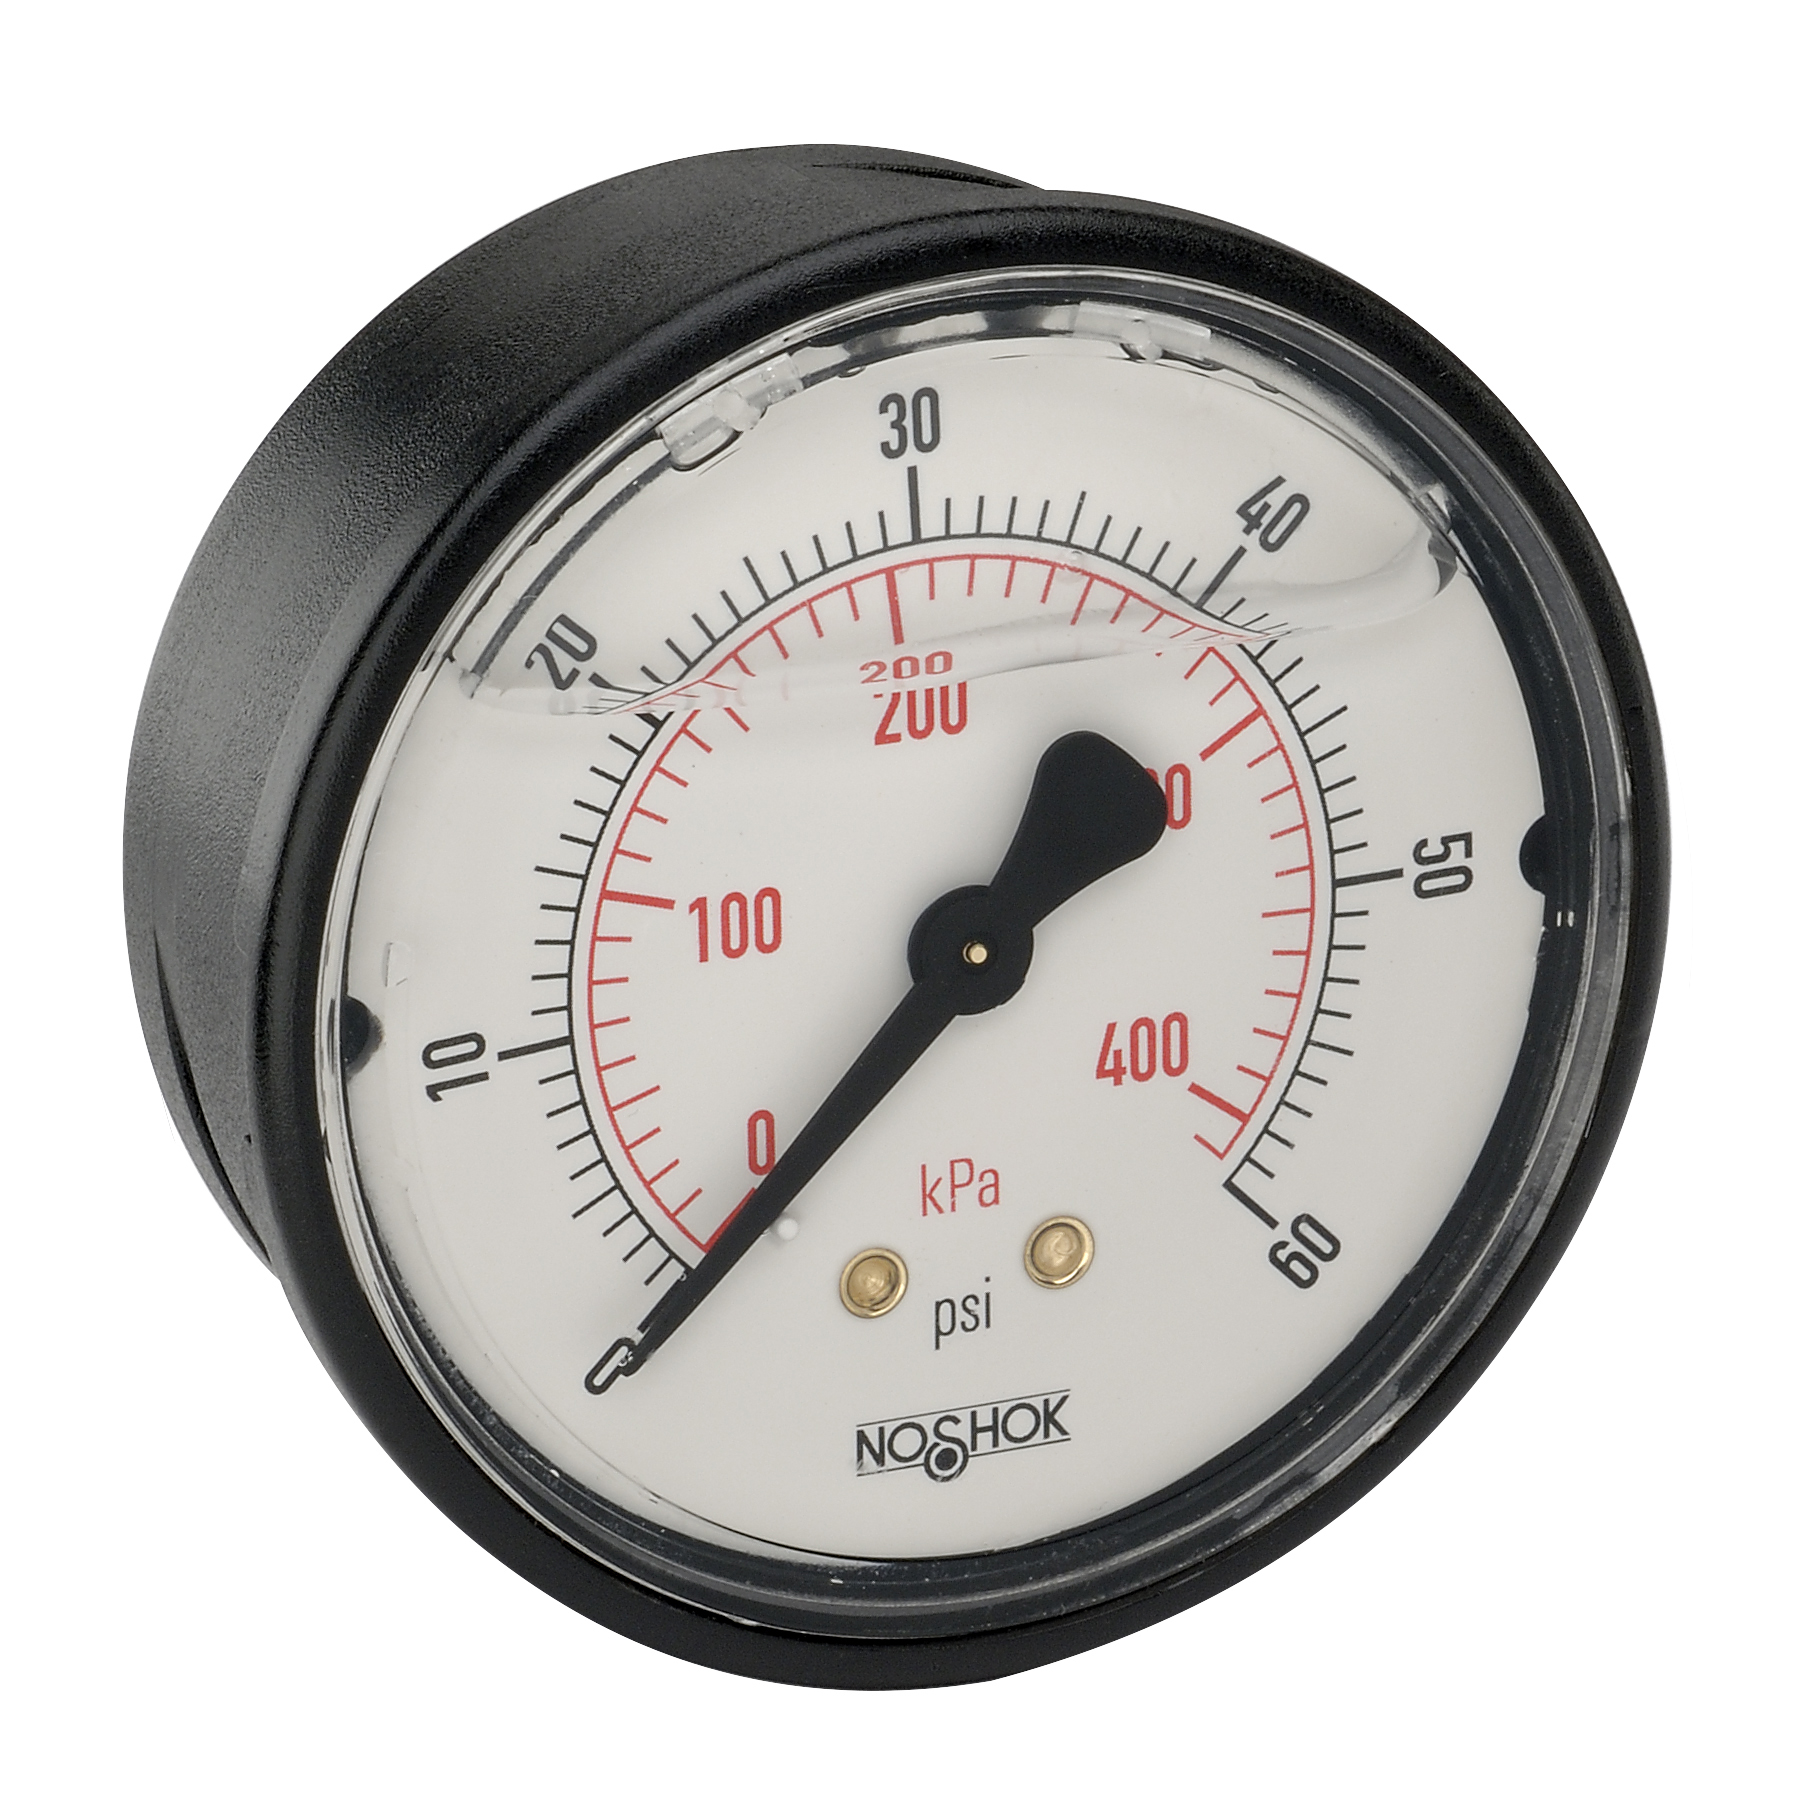 25-910-5000-psi/kPa-BLFF 900 Series ABS and Stainless Steel Liquid Filled Pressure Gauges